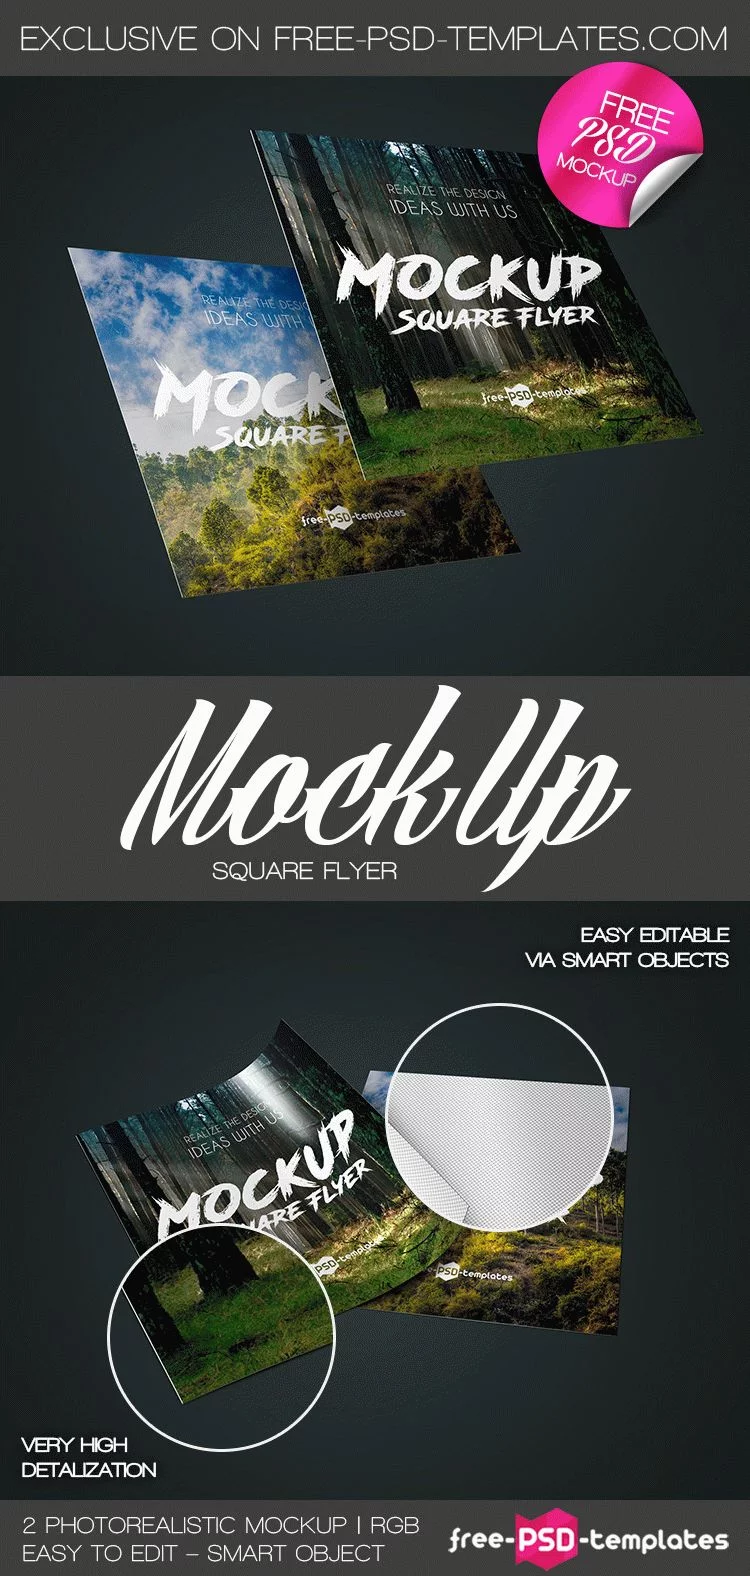 2 Free Square Flyer Mock-ups in PSD